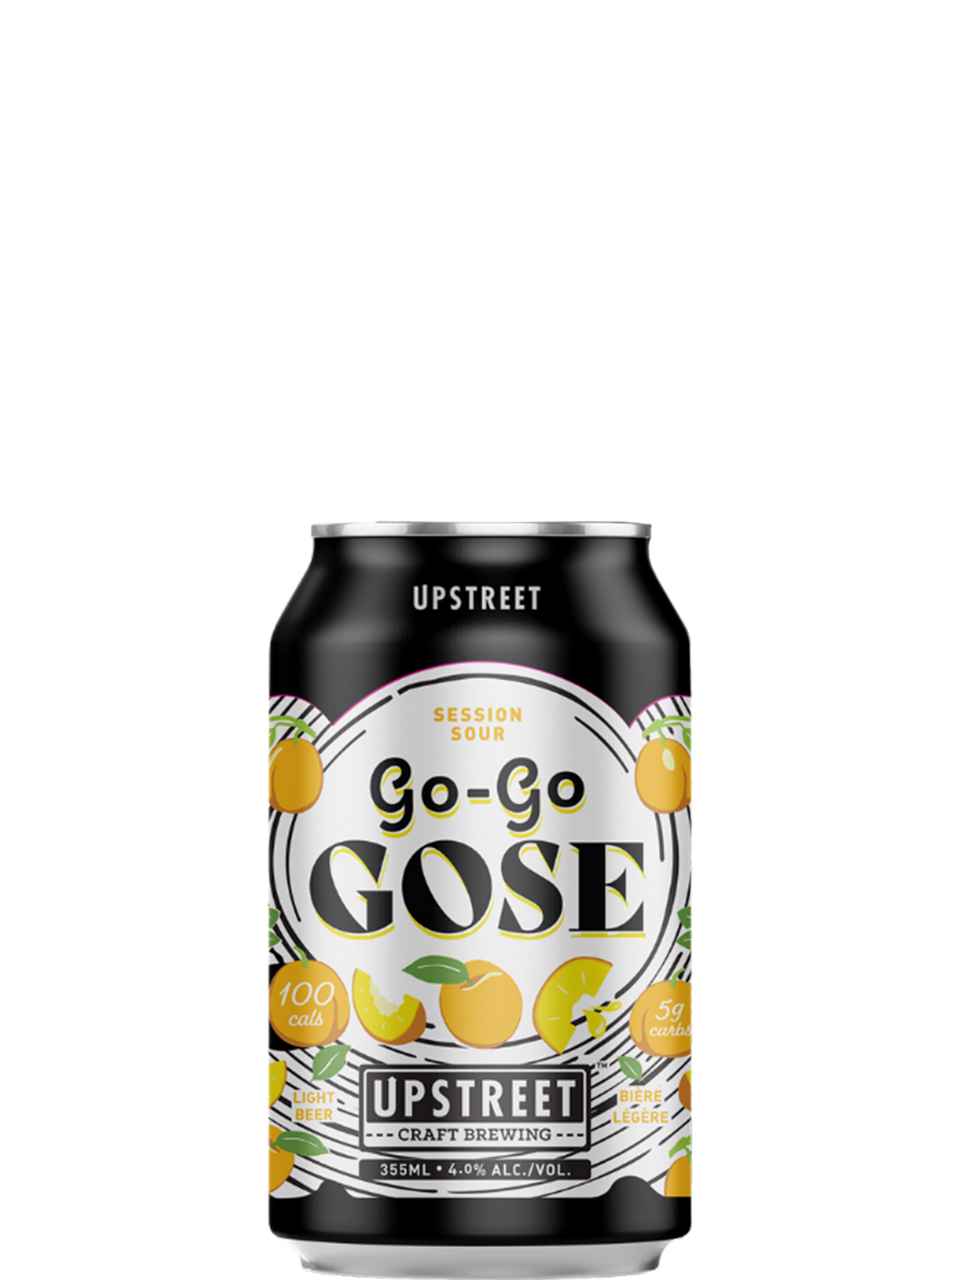 Upstreet Go Go Gose Session Sour 4 Pack Cans